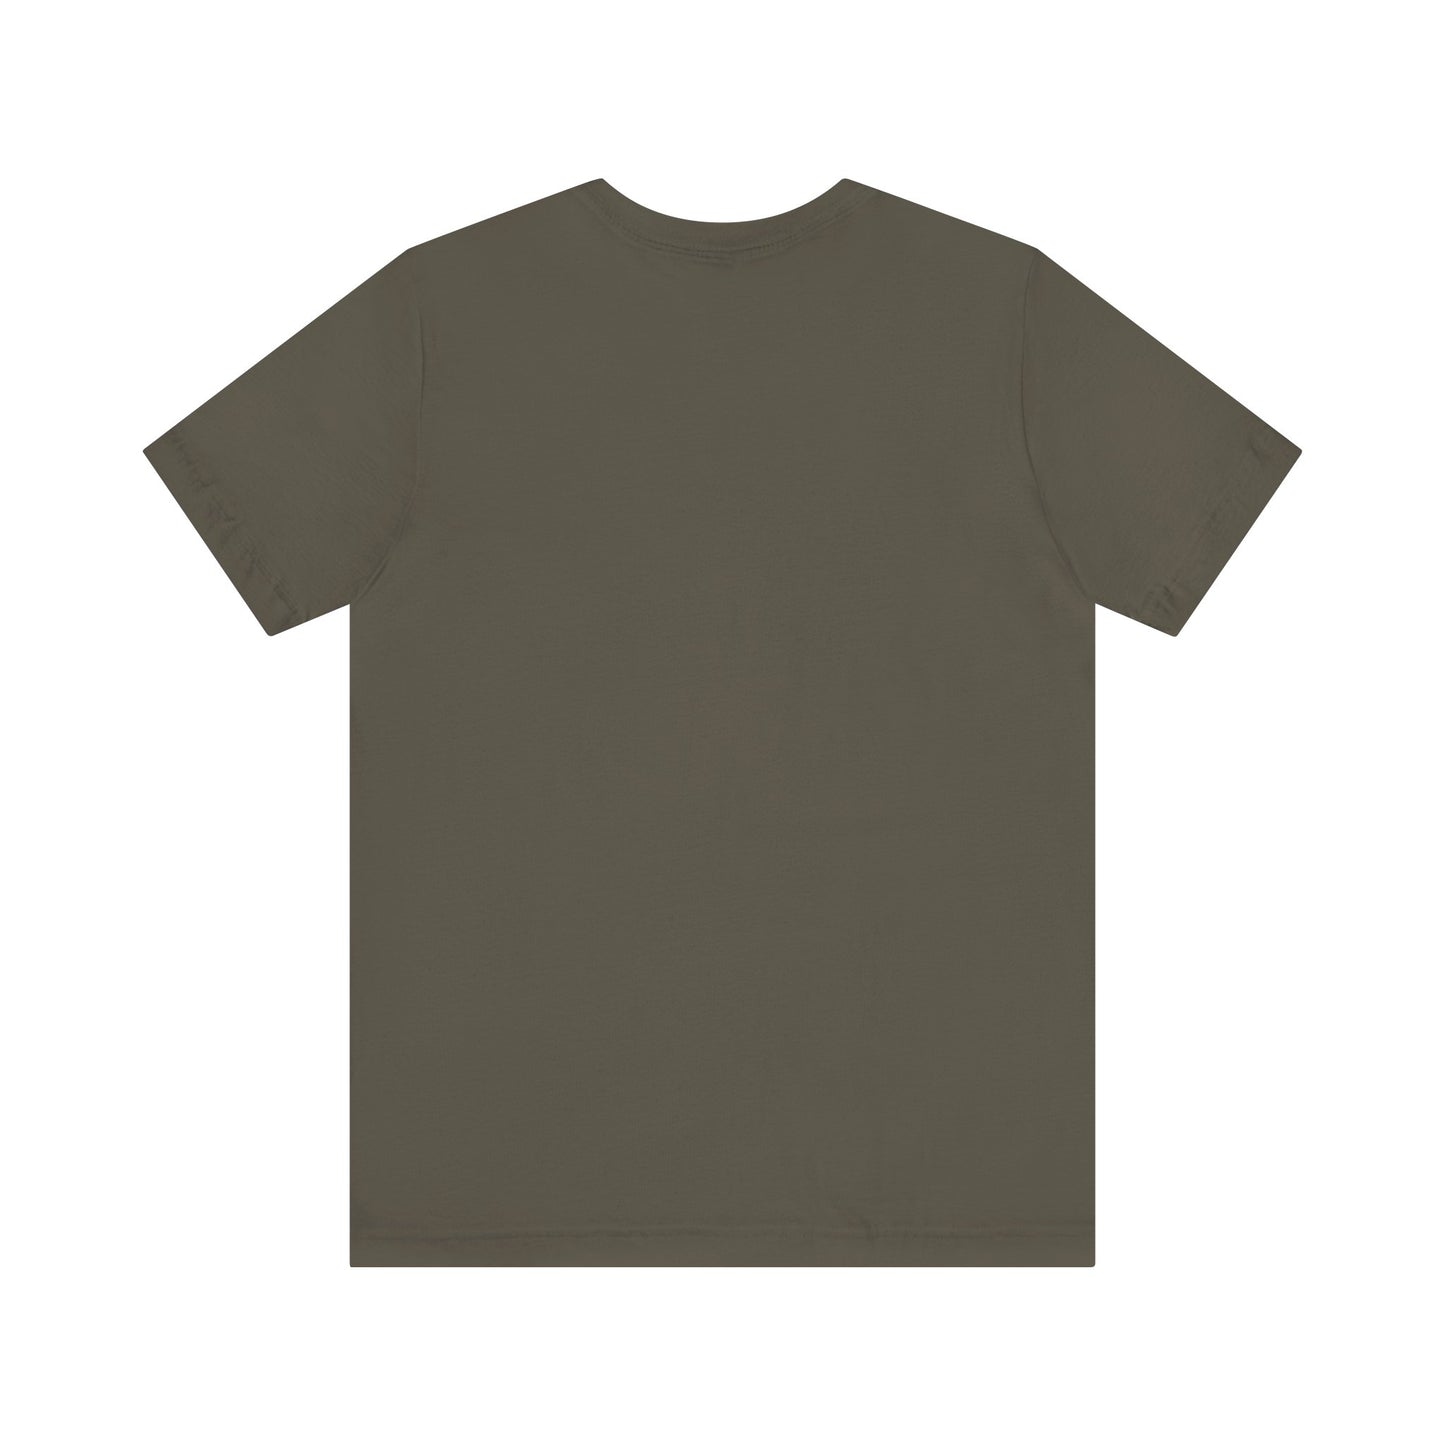 Army Strong-Unisex Jersey Short Sleeve Tee